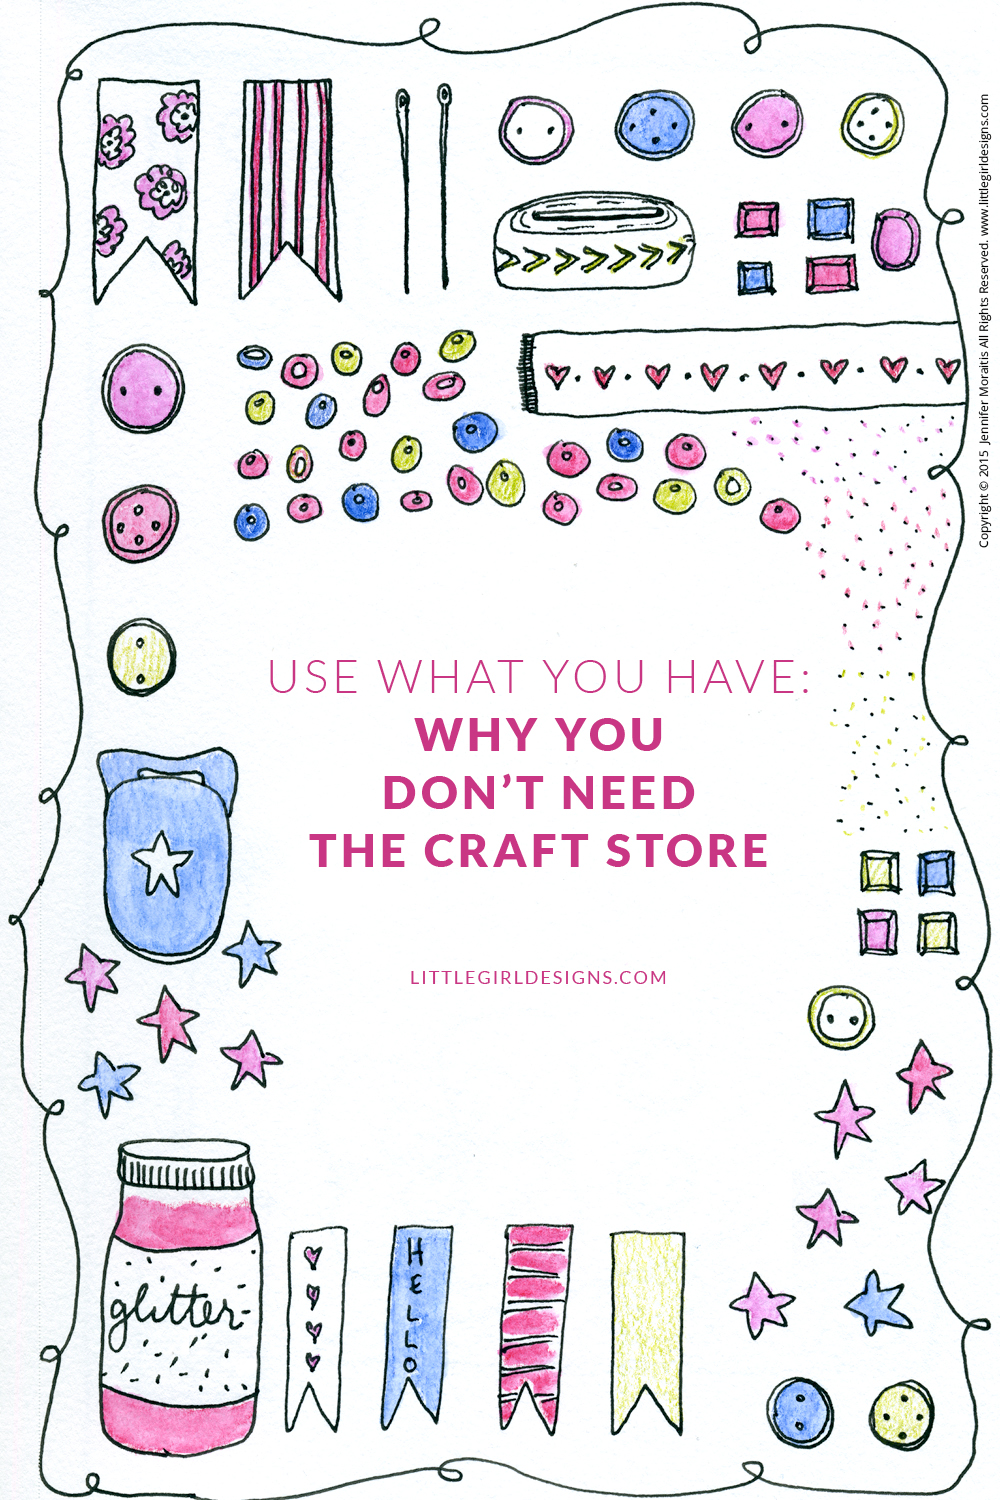 Use What You Have: Why You Don't Need the Craft Store if you're a crafter. What could you make today...with what you already have? @littlegirldesigns.com #usewhatyouhave